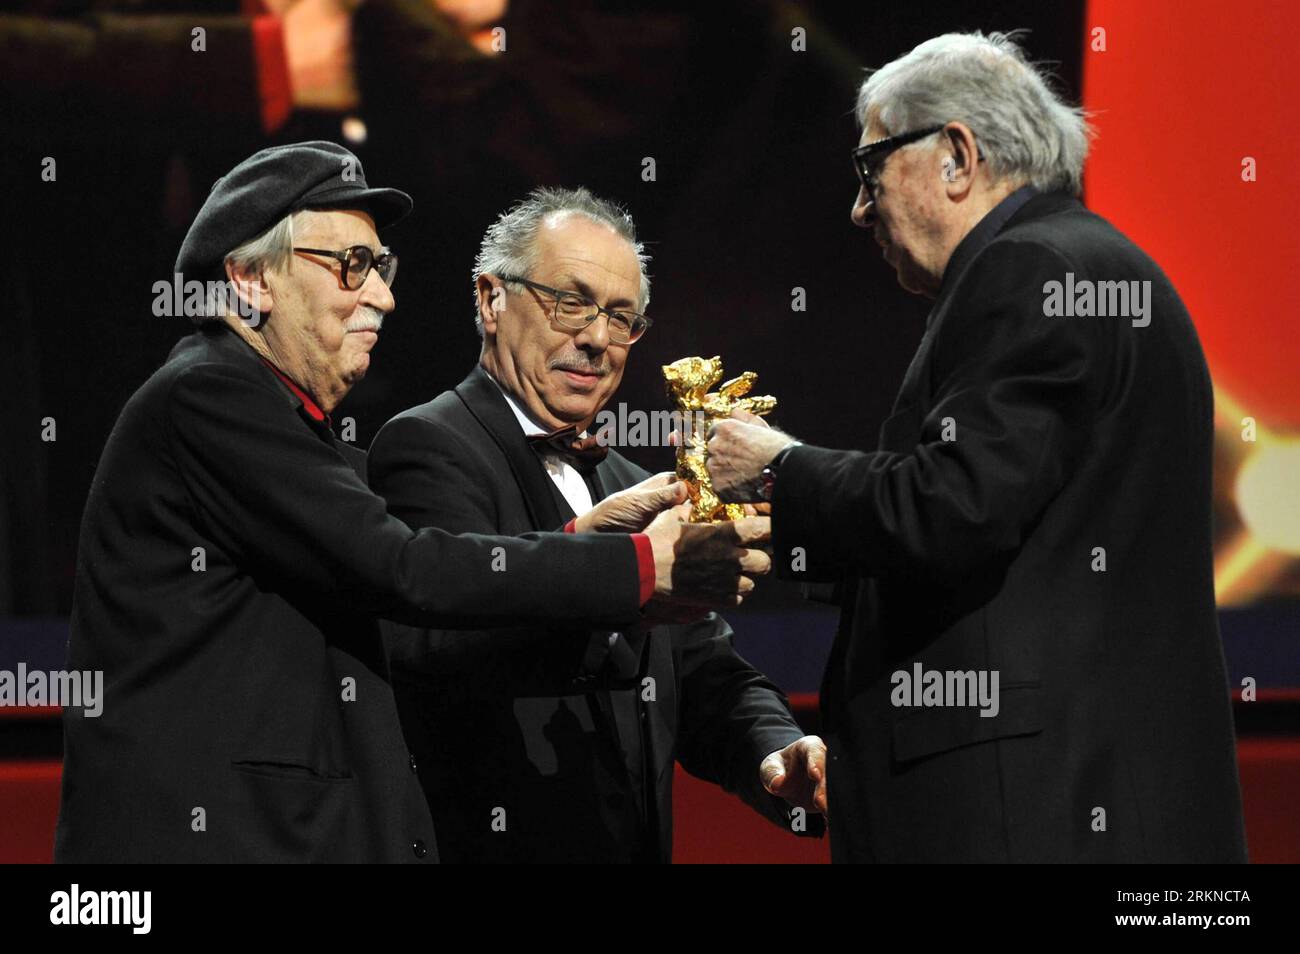 (120218) -- BERLIN, Feb. 18, 2012 (Xinhua) -- Italian directors Paolo Taviani (L) and Vittorio Taviani (C) for the movie Caesare Deve Morire ( Caesar Must Die ) receive the Golden Bear award for the best film from Berlinale s director Dieter Kosslick (R) during the awards ceremony at the 62nd Berlinale film festival in Berlin, capital of Germany, on Feb. 18, 2012. (Xinhua/Ma Ning) (yy) GERMANY-BERLINALE FILM FESTIVAL- PUBLICATIONxNOTxINxCHN Stock Photo